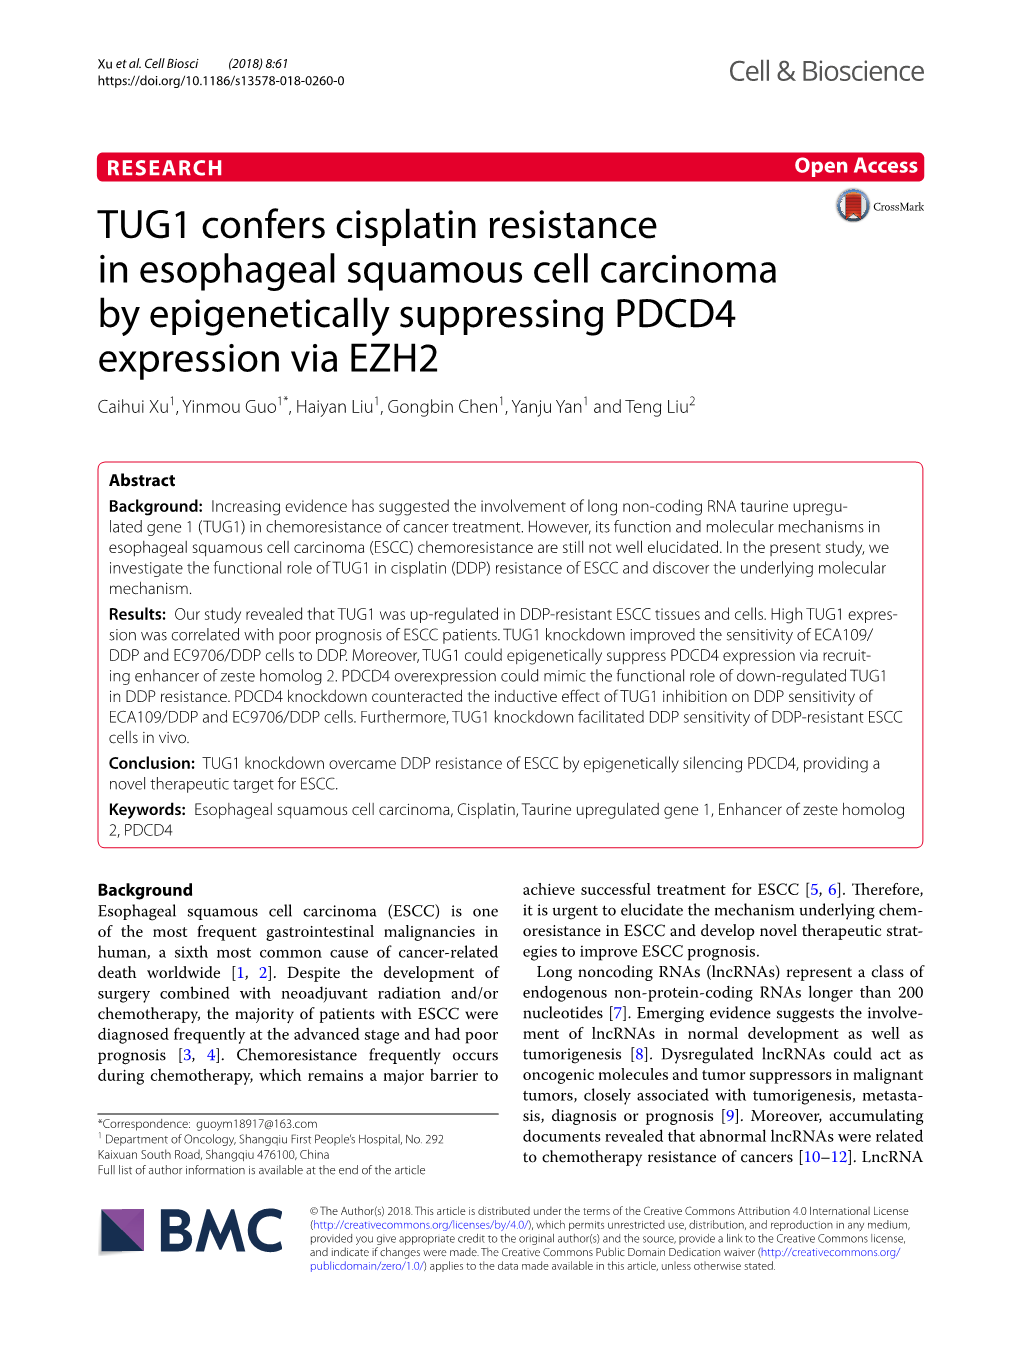 TUG1 Confers Cisplatin Resistance in Esophageal Squamous Cell